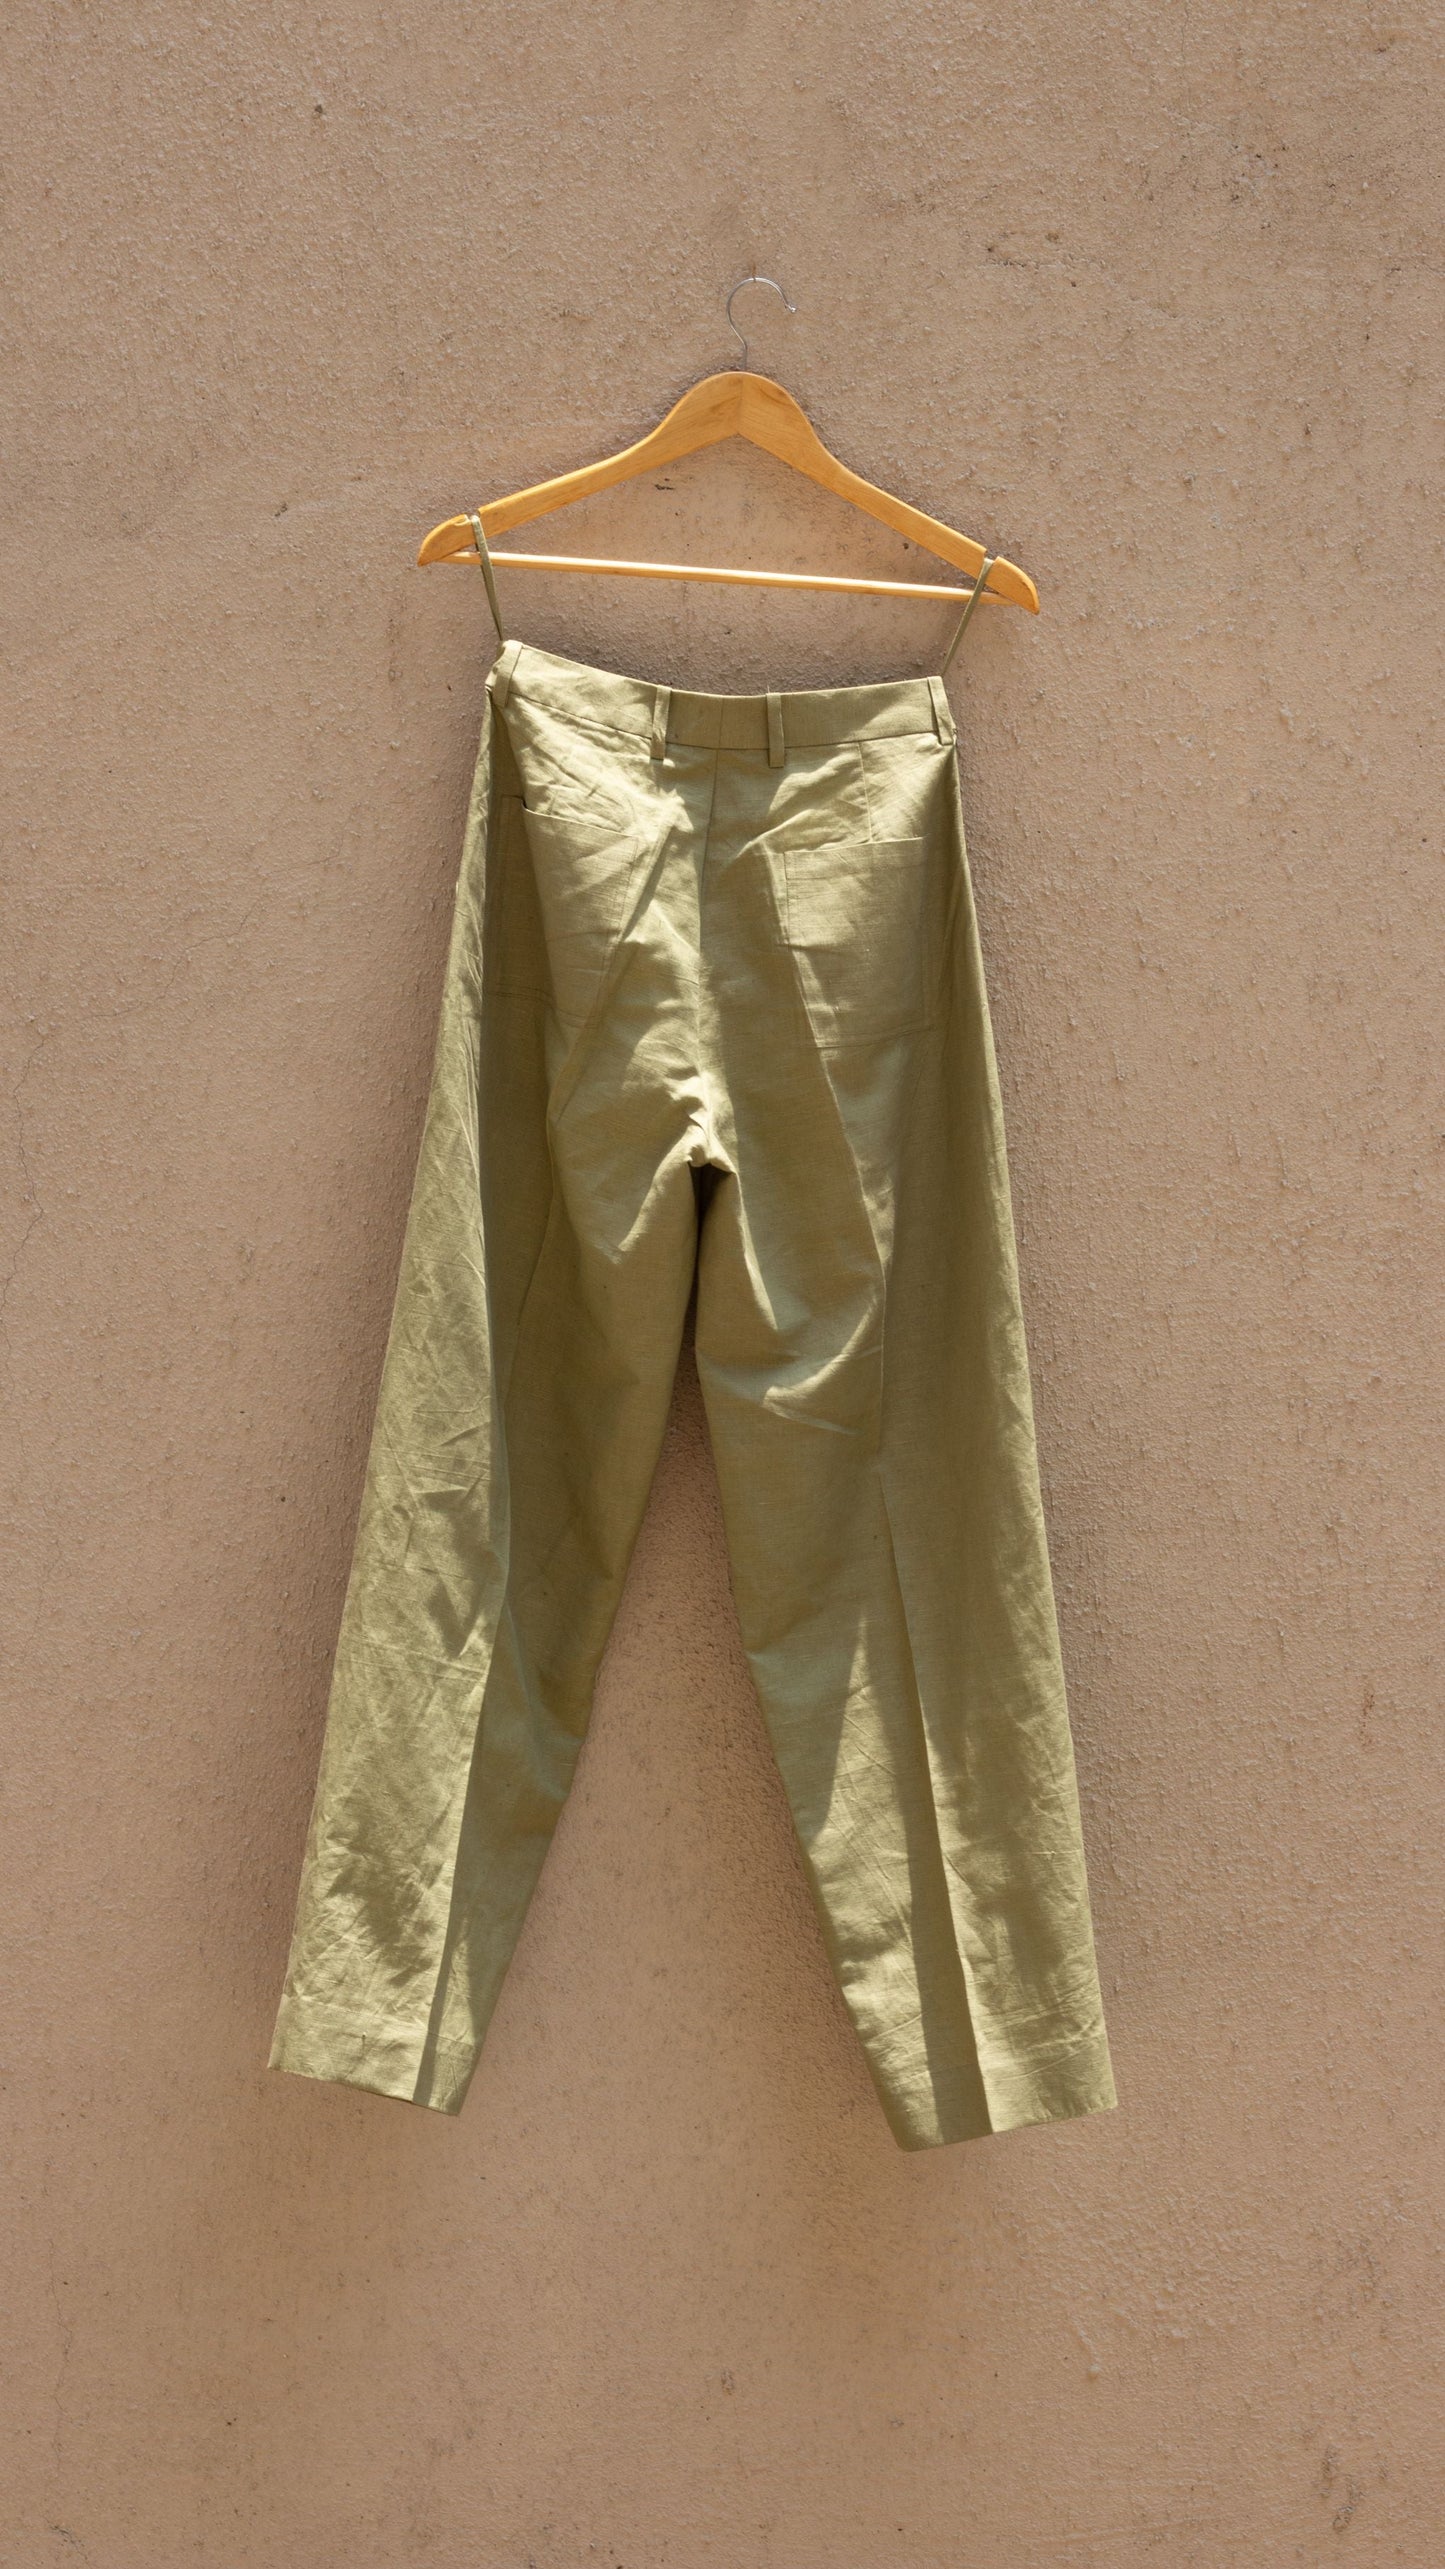 Green Casual Pants at Kamakhyaa by Anushé Pirani. This item is Casual Wear, Cotton, Cotton Hemp, For Him, Green, Handwoven, Hemp, Mens Bottom, Menswear, Pants, Relaxed Fit, Shibumi Collection, Solids